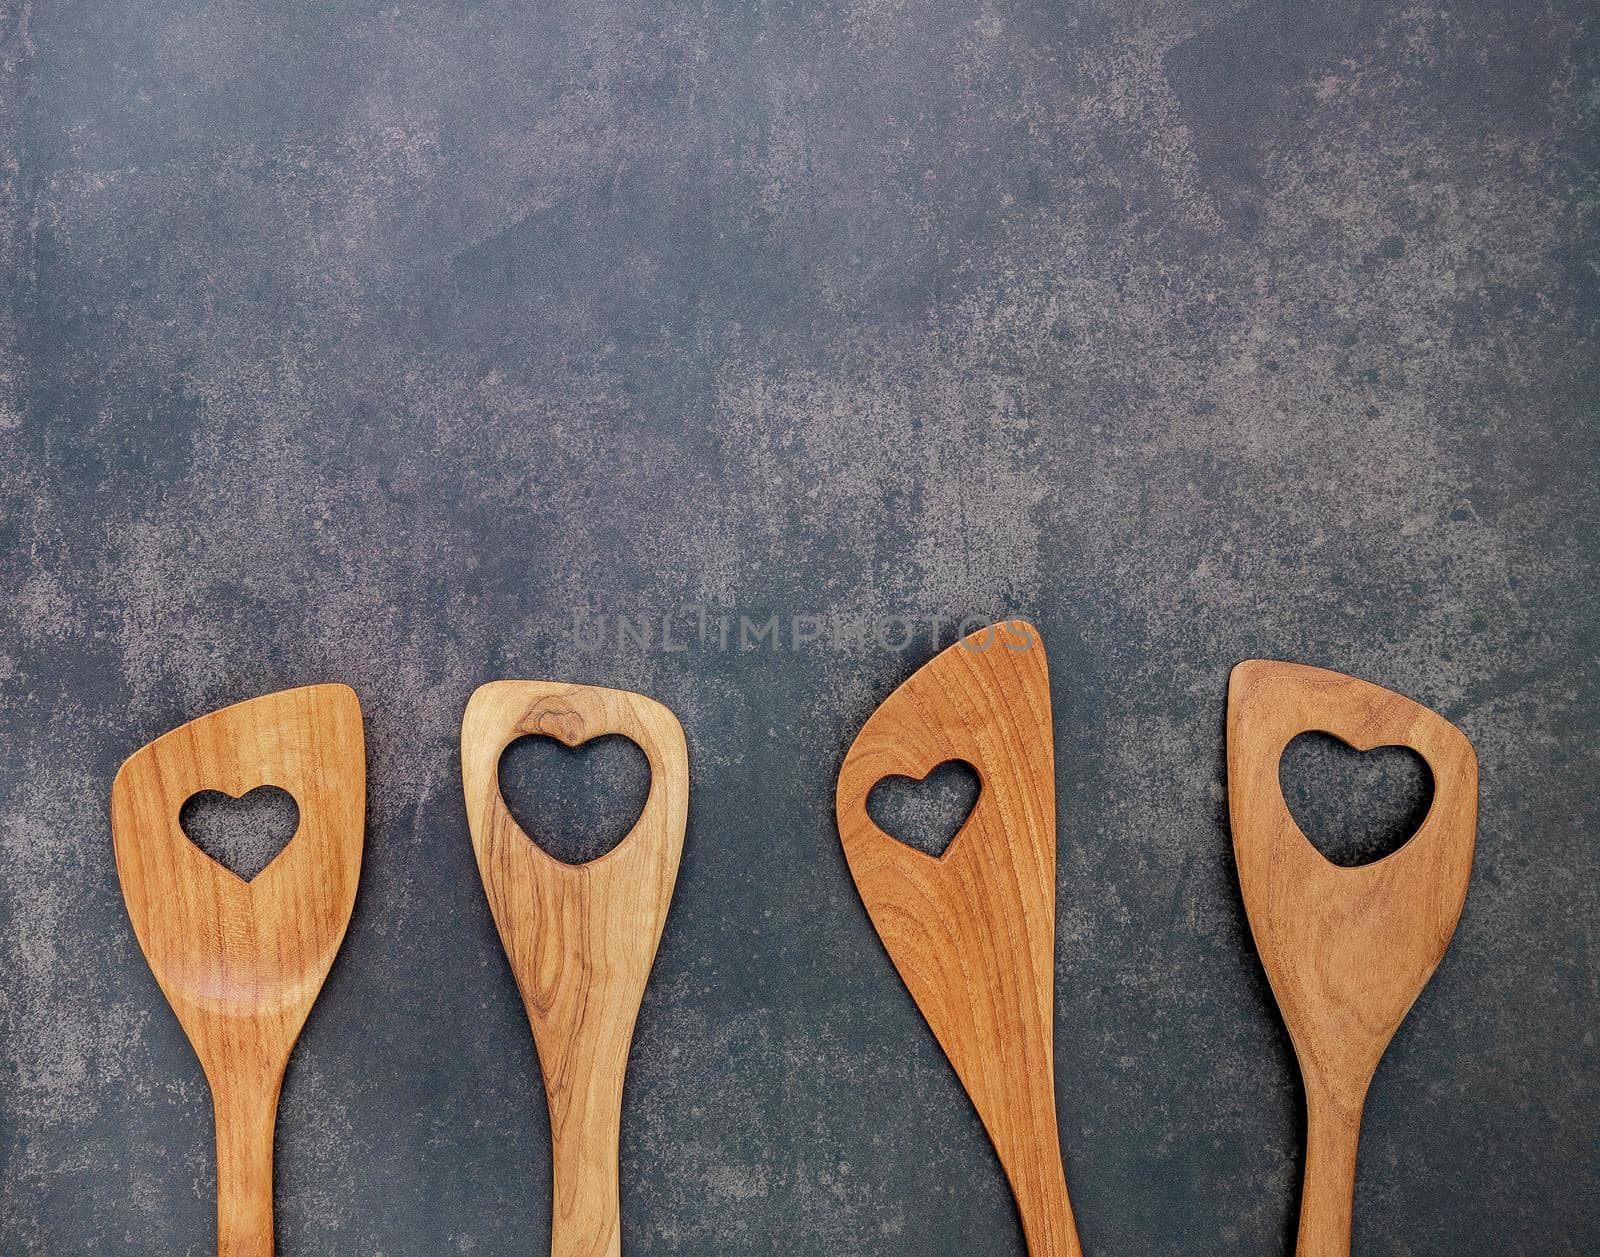 Various heart shape of wooden cooking utensils. Wooden spoons and wooden spatula on dark concrete background with flat lay and copy space.